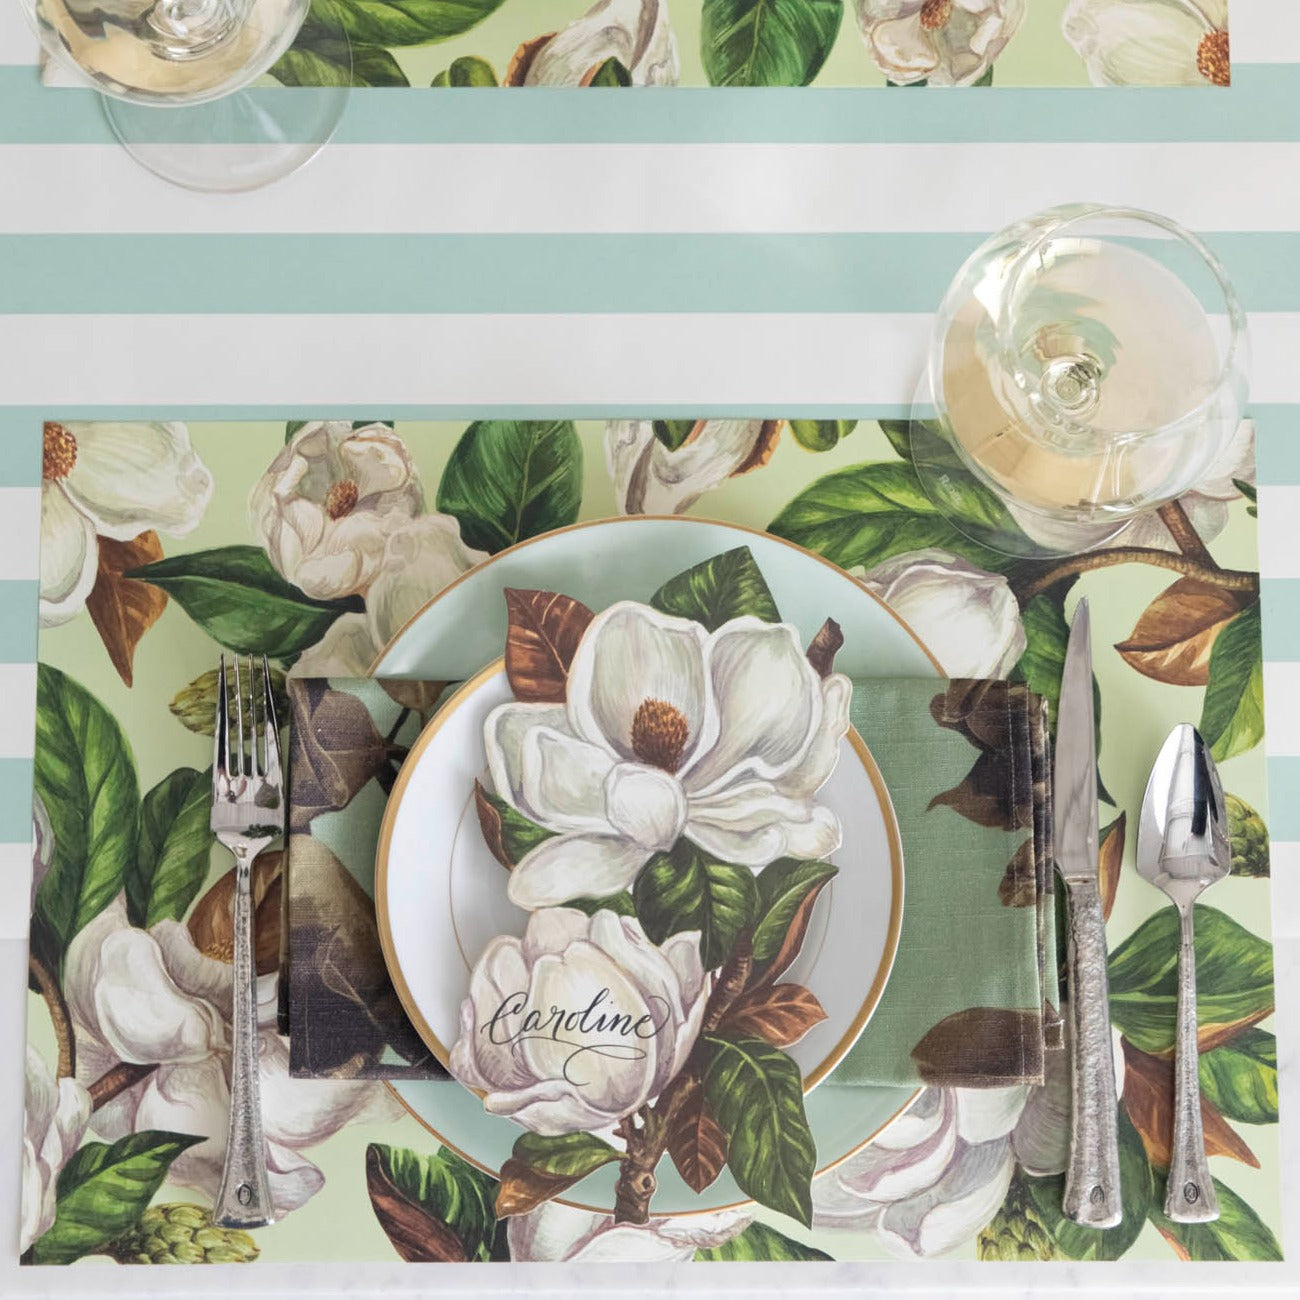 These Mint Magnolia Blooms Placemats by Hester &amp; Cook are a perfect choice to add elegance and charm to any dining experience, whether you&